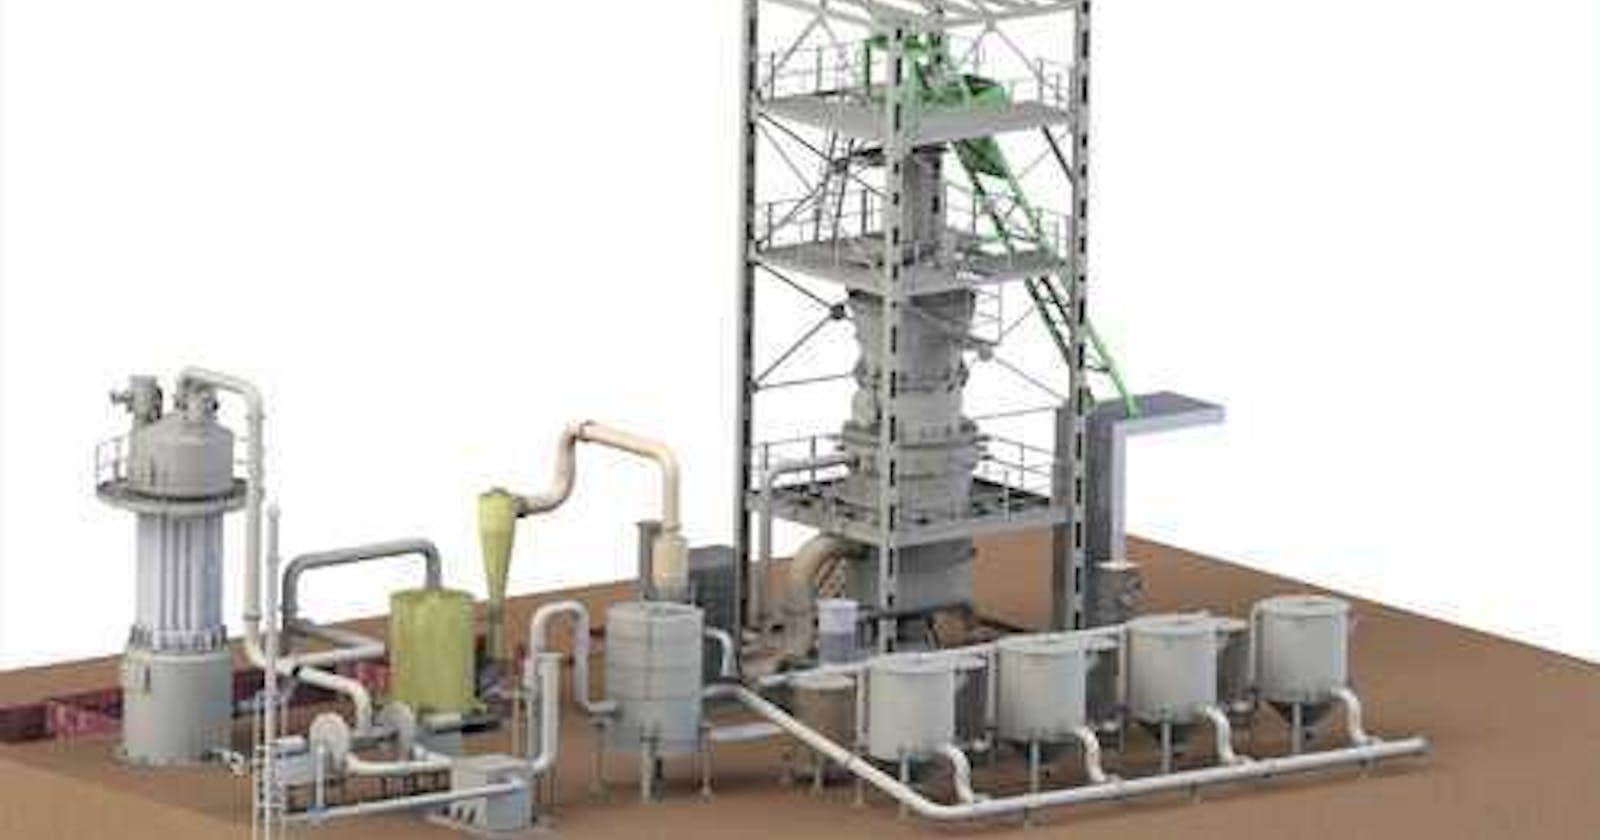 India Biomass Gasification Market 2027: Analysis, Size, Share, Trends and Outlook